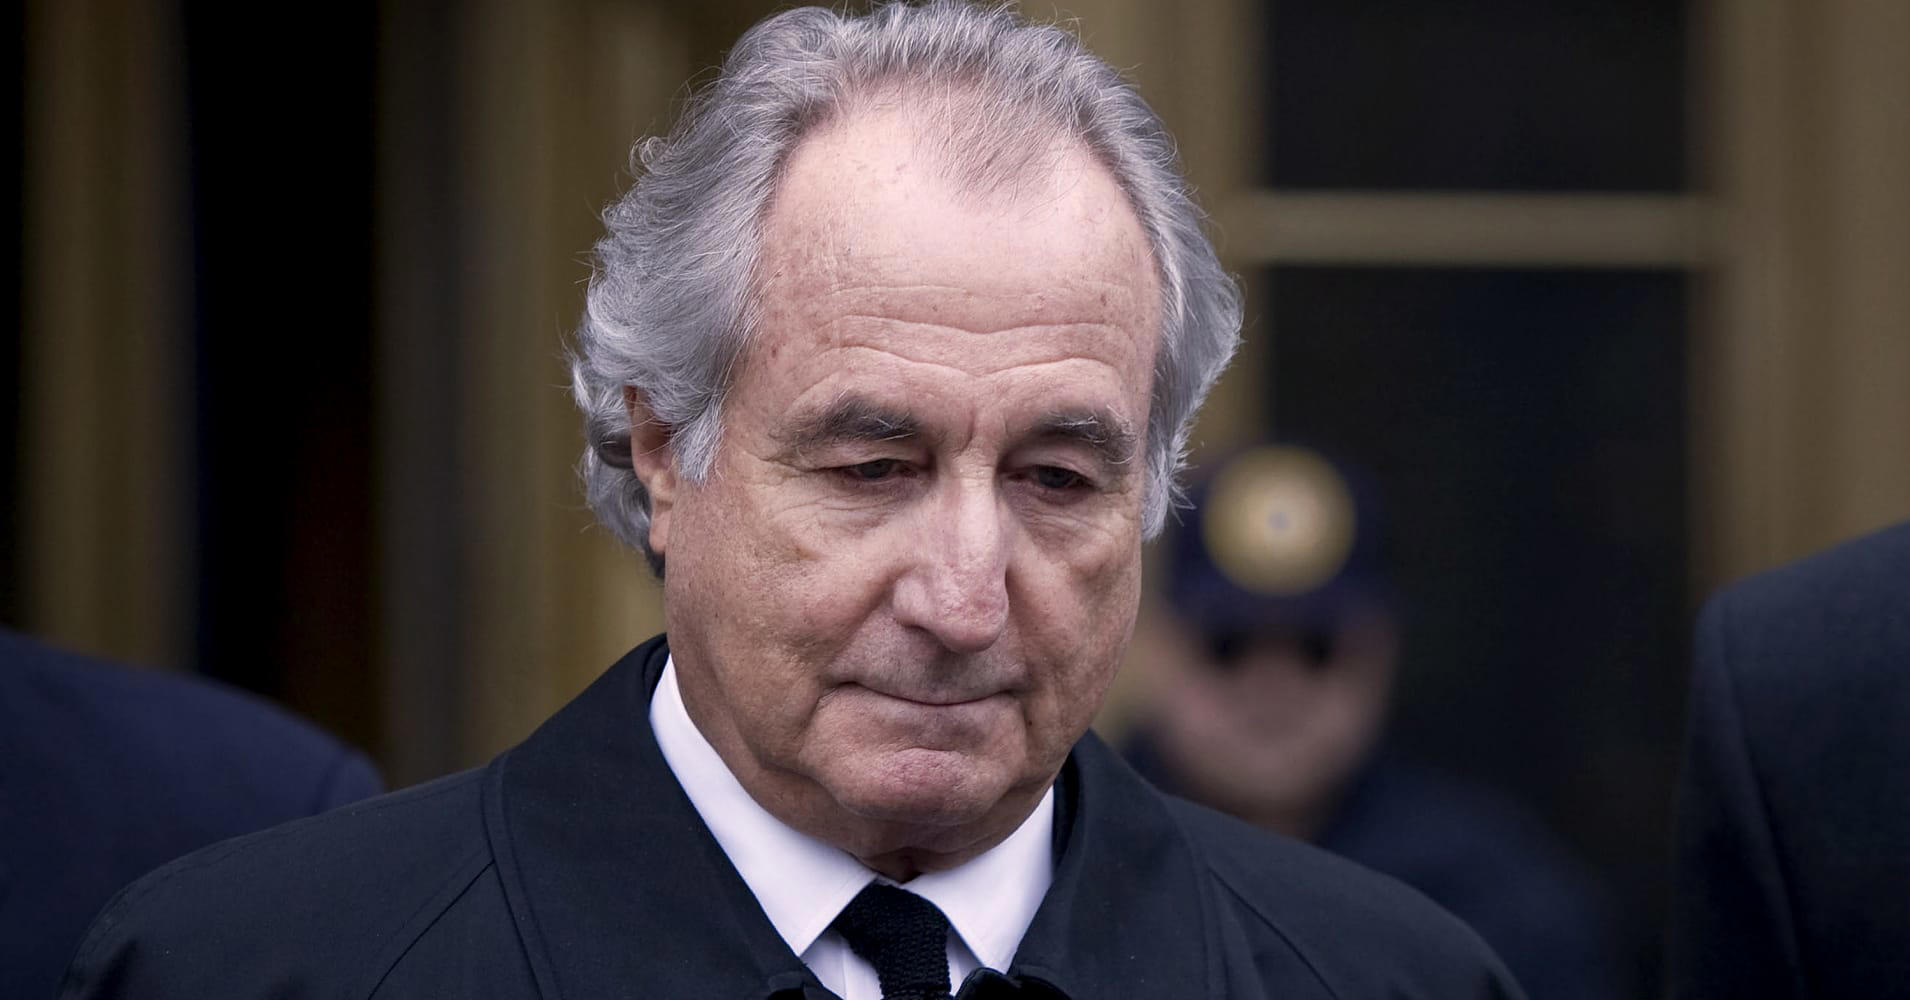 Bernie Madoff Victims Get 159 Million From Ponzi Recovery Fund In Latest Payout 0841